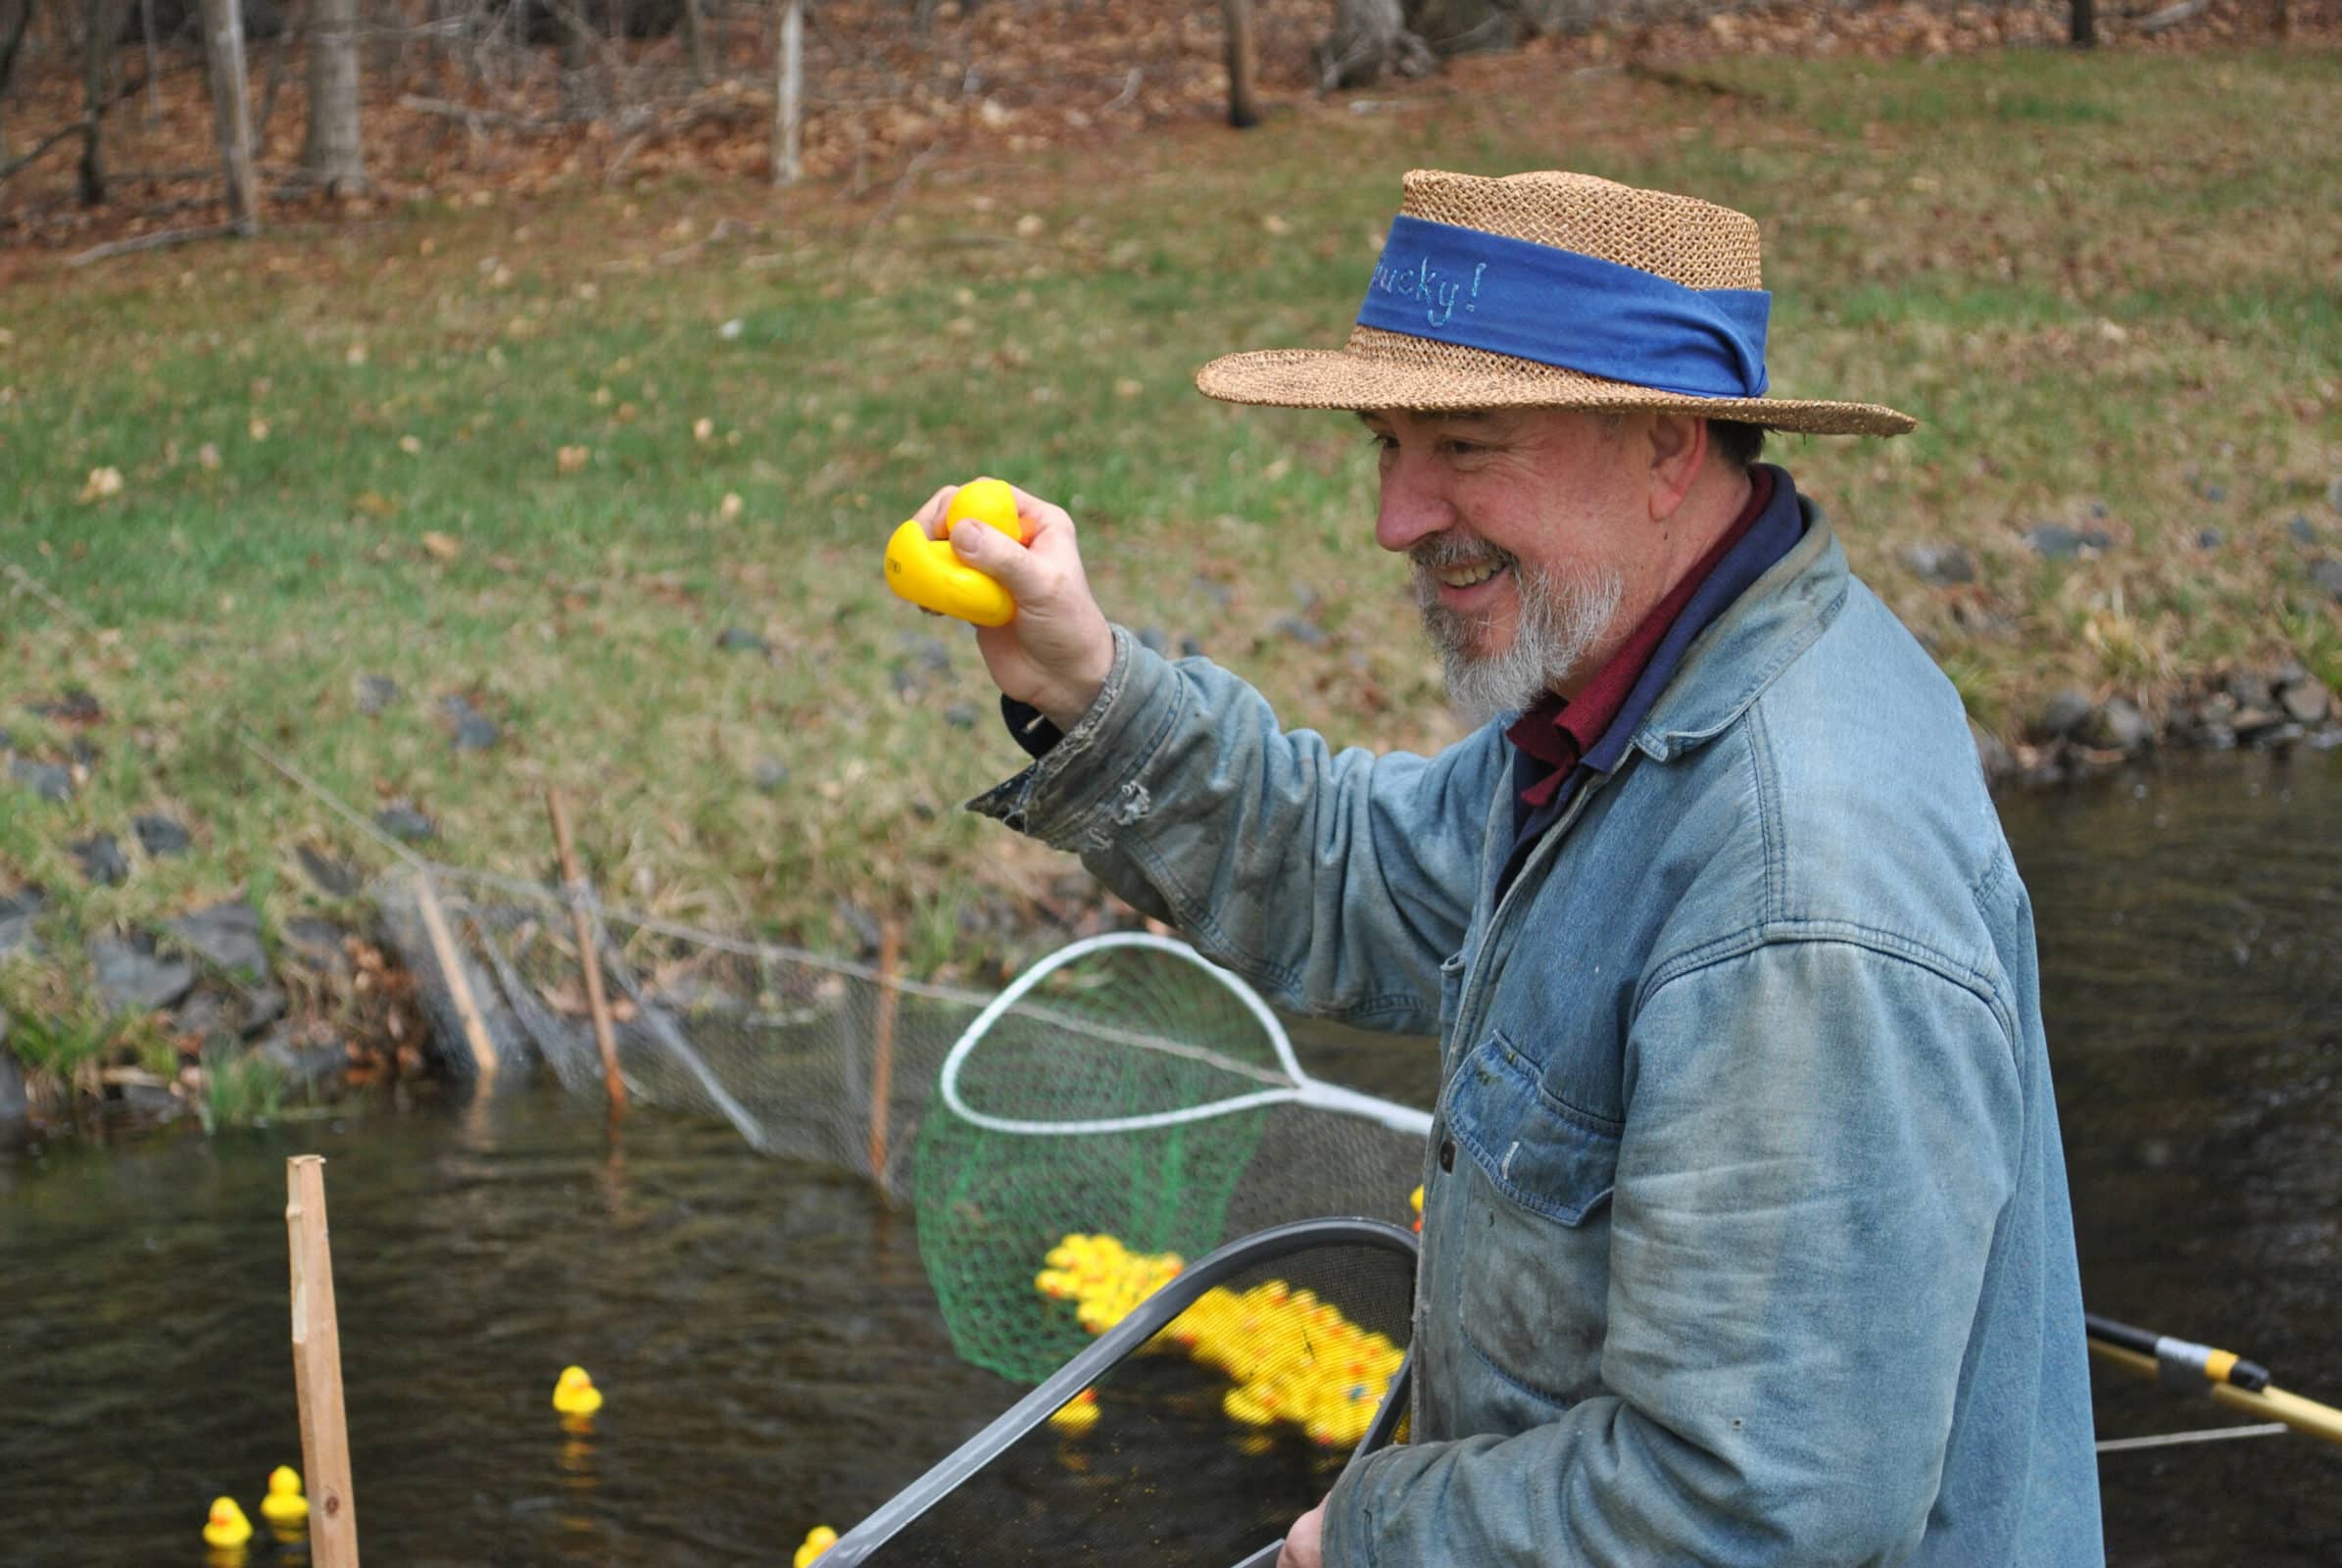 Westborough Lions host 2nd annual Rubber Duck Derby